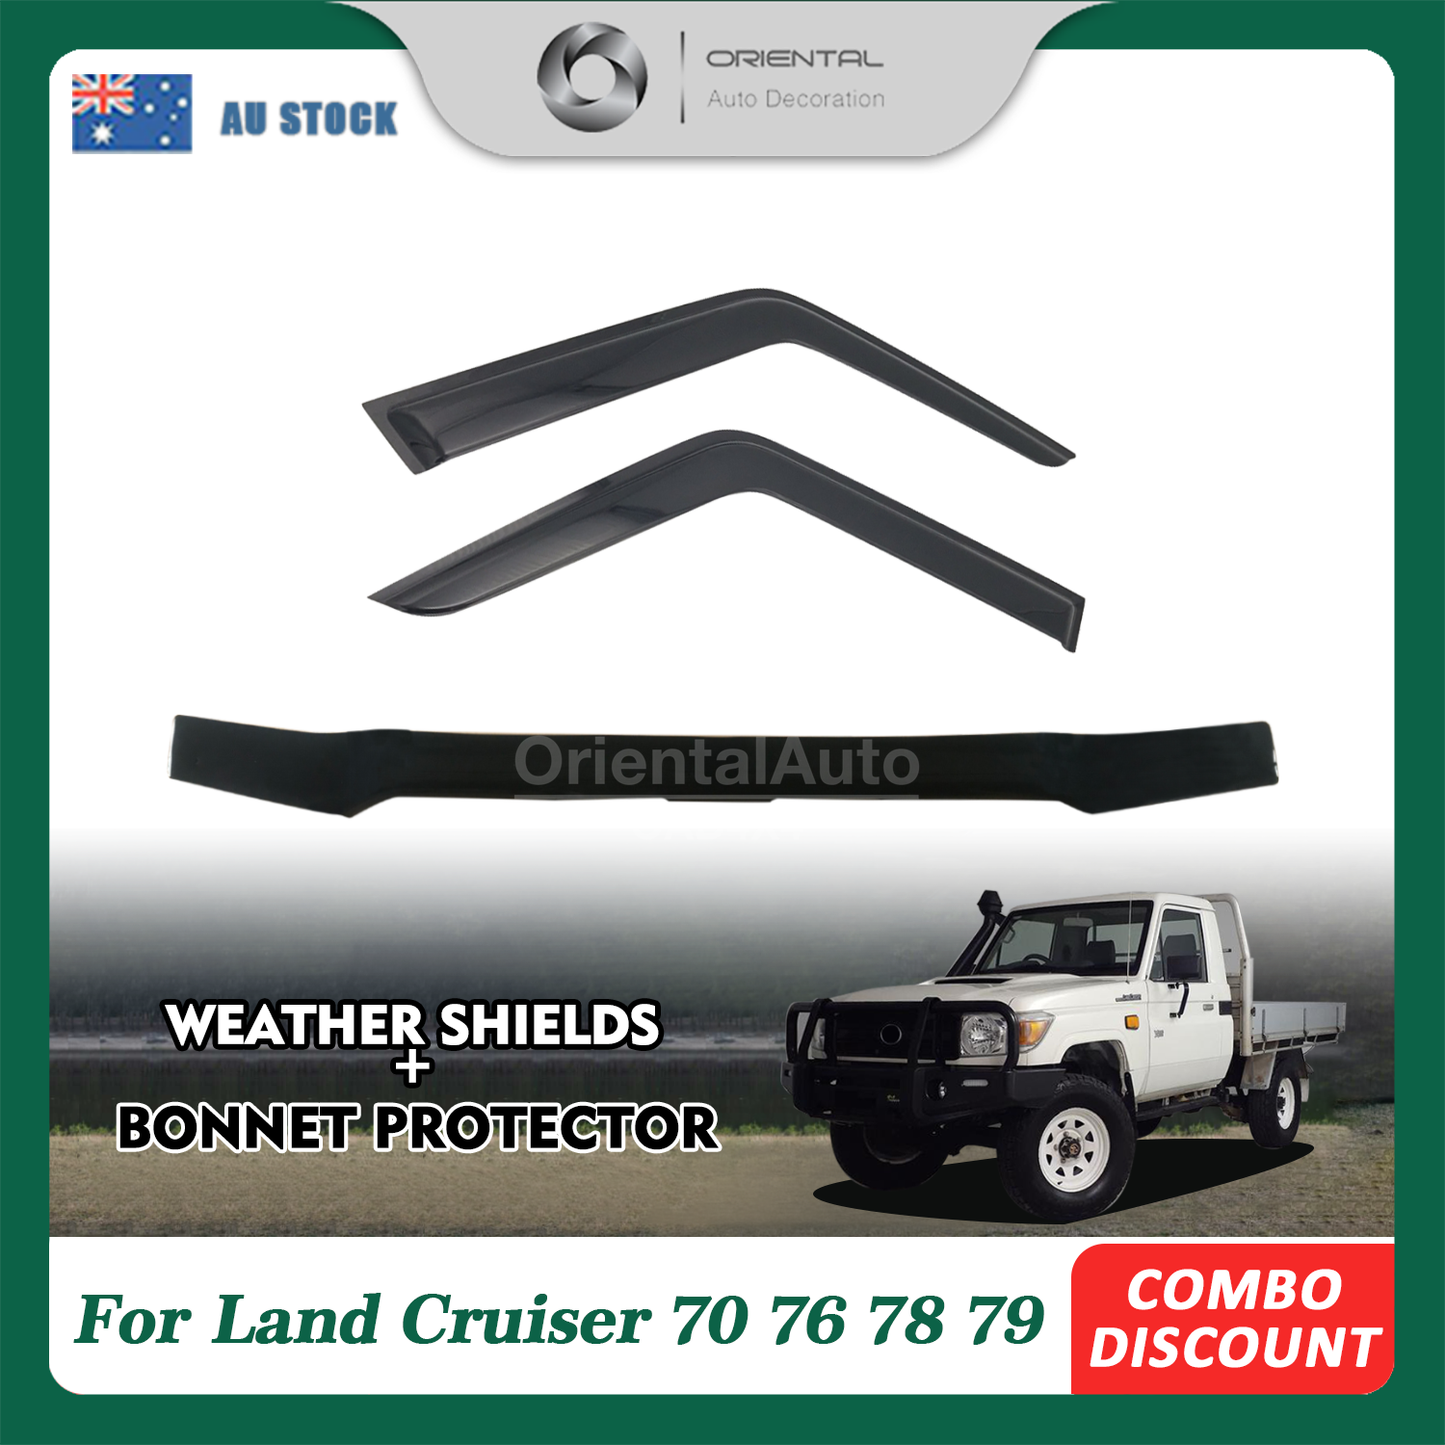 OAD Bonnet Protector & Luxury Weathershields Weather Shields Window Visor for Toyota Landcruiser Land cruiser 70 76 78 79 LC70 LC76 LC78 LC79 2007-2016